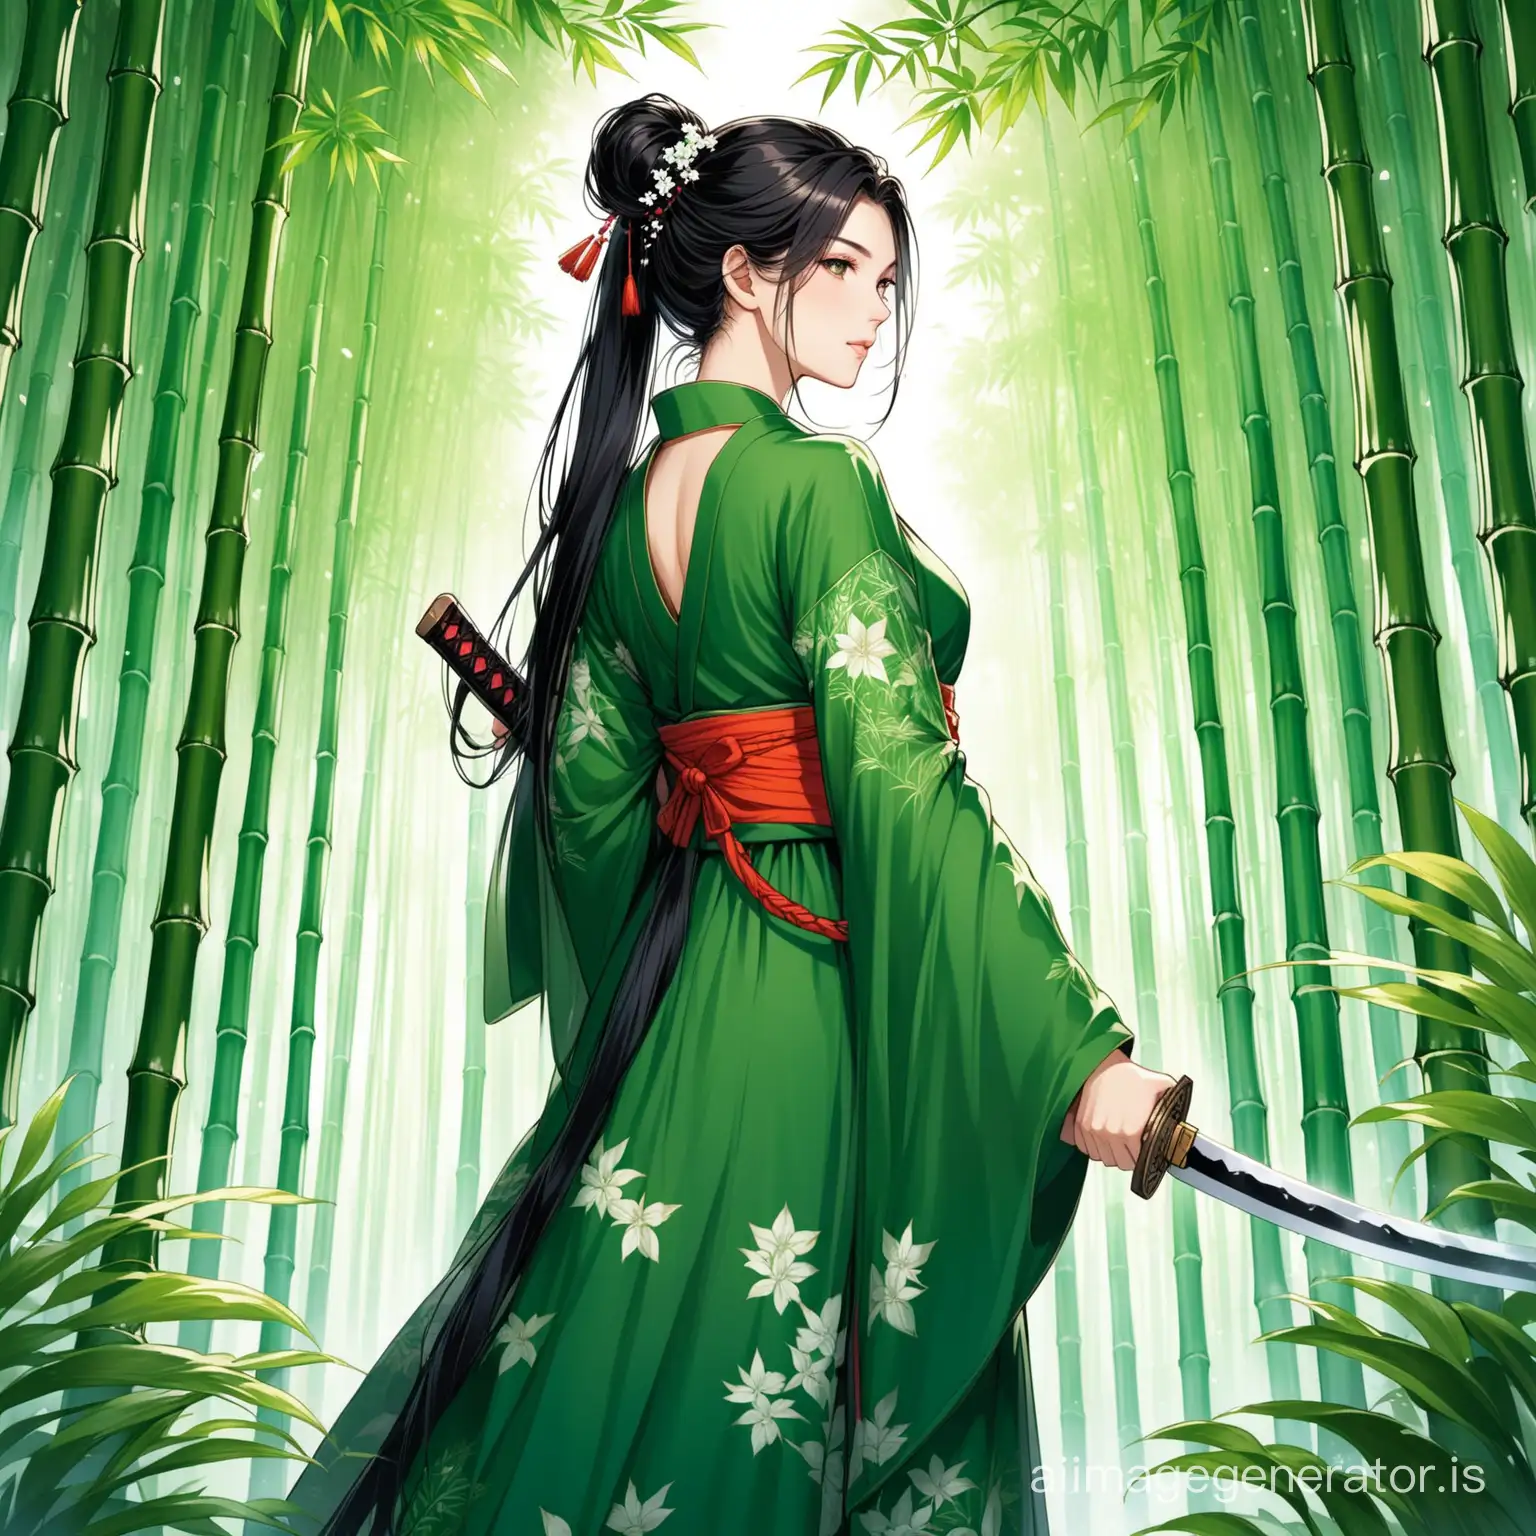 Imagine a female samurai who embodies the essence of nature itself, her form a mesmerizing fusion of plant life and warrior spirit. She stands tall and proud in her Hanfu attire, the fabric adorned with intricate floral patterns that seem to bloom and intertwine with her verdant form. Jet black hair cascades down her back, a stark contrast against the lush greenery that envelops her. Her skin, a delicate blend of human and plant tissue, glows with an otherworldly radiance, while her eyes shimmer with the wisdom of ancient forests. In her hand, she wields a katana forged from enchanted wood, its blade shimmering with ethereal energy. Set her amidst a serene garden or bamboo grove, where the tranquility of nature harmonizes with the intensity of her warrior's spirit. Capture the essence of her strength, grace, and connection to the natural world in your depiction.